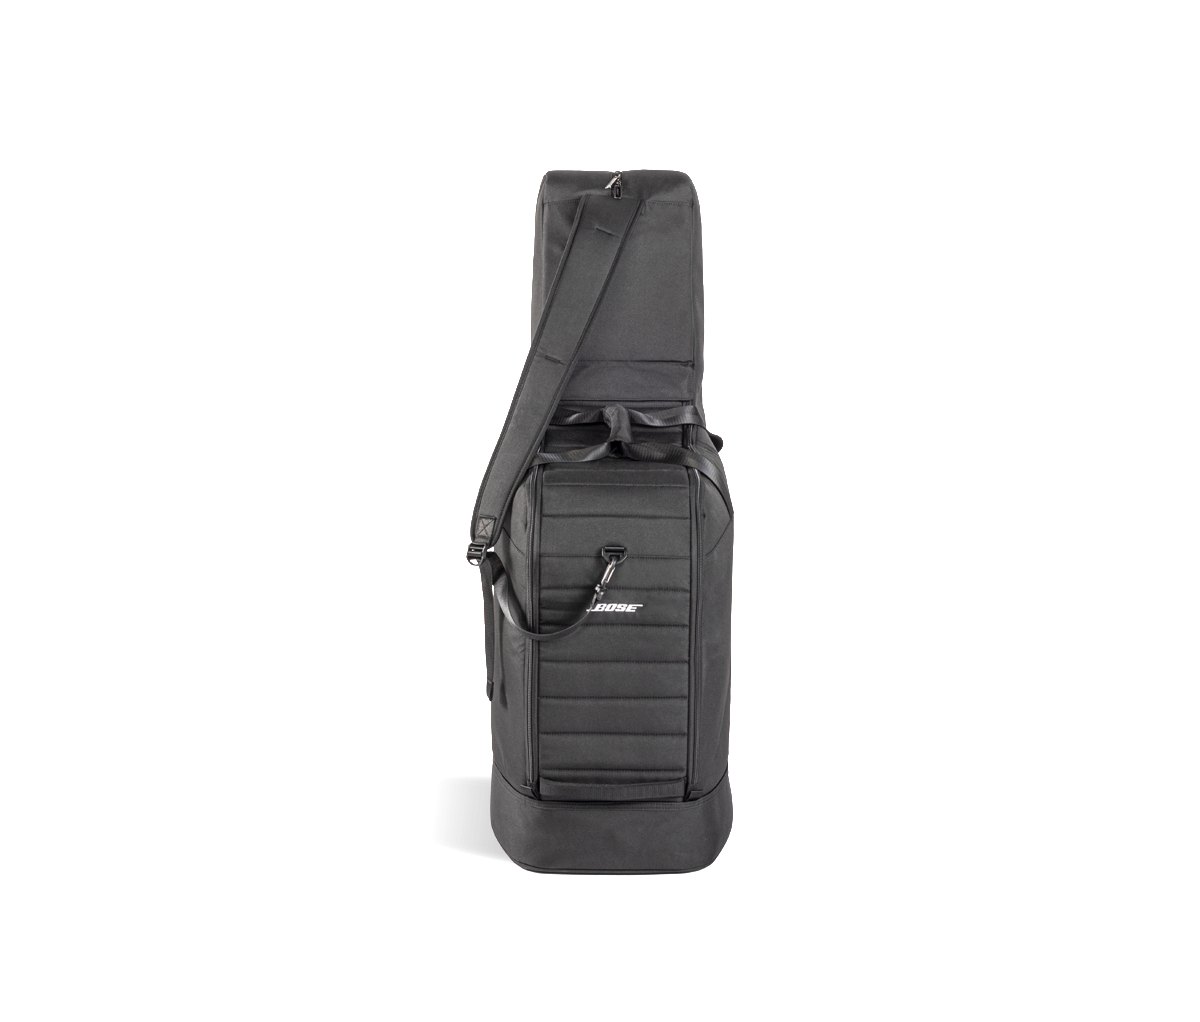 L1 Pro8 SystemBag front